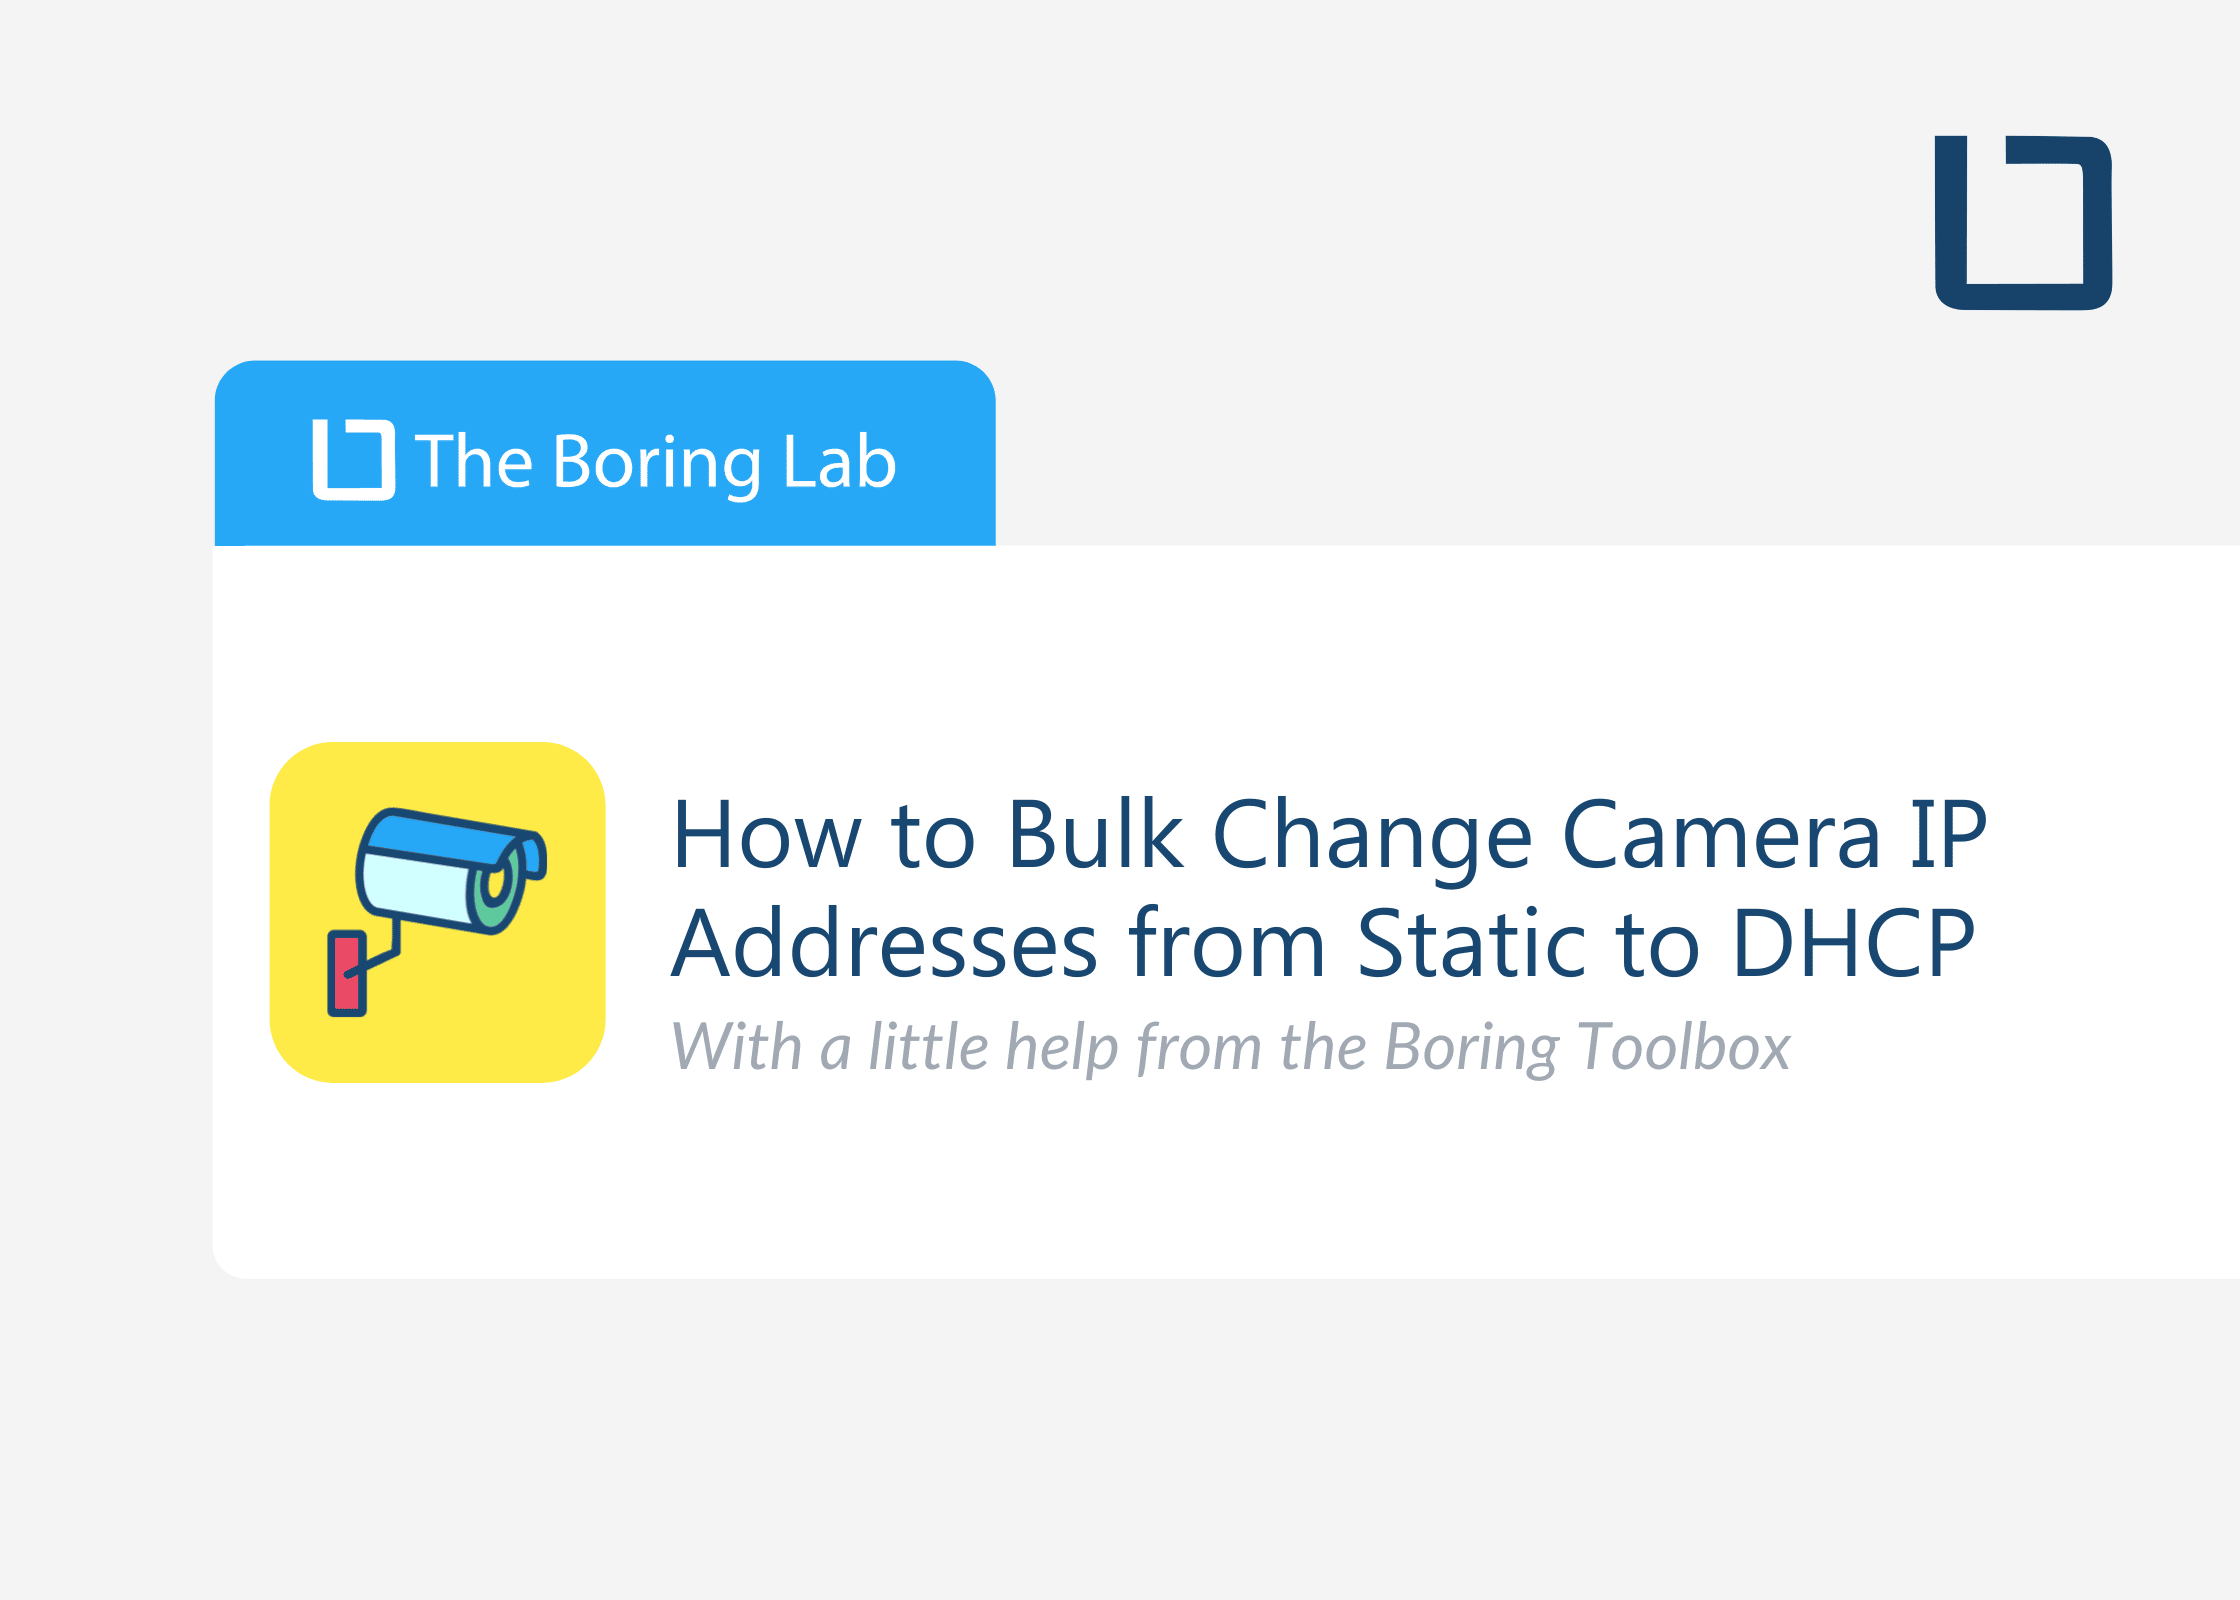 How to Bulk Change Camera IP Addresses from Static to DHCP